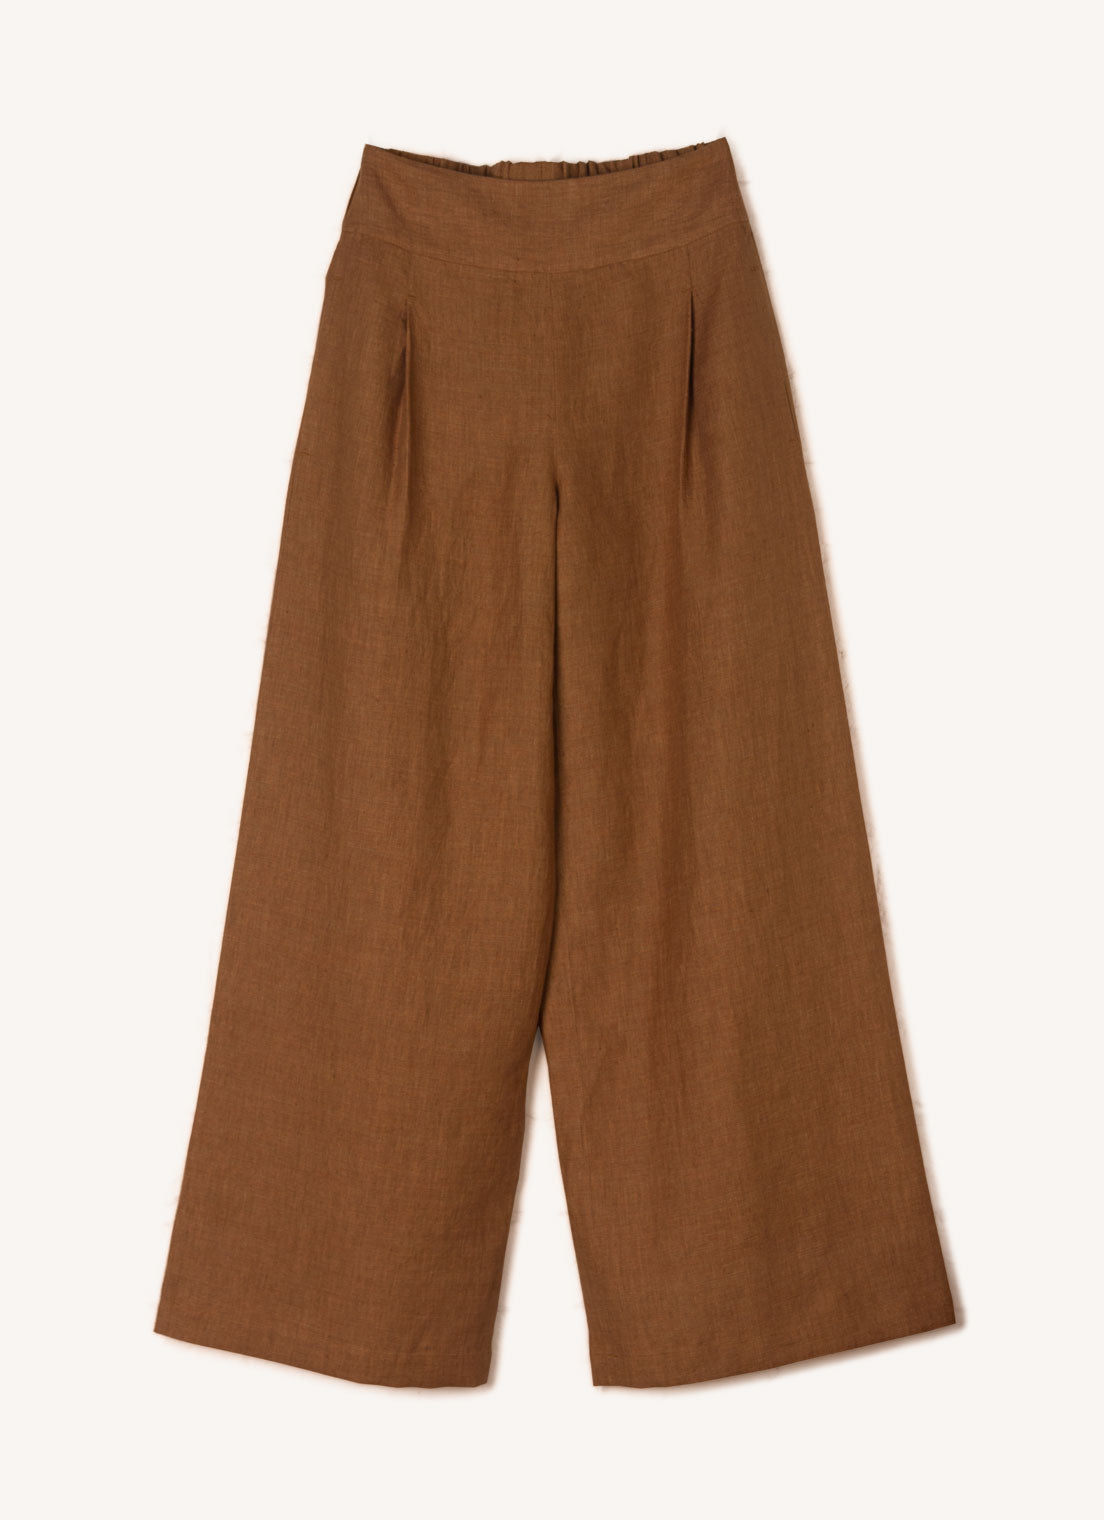 A bronze, wide-leg pants with wide and elasticated back waistband and side pockets in pure European linen